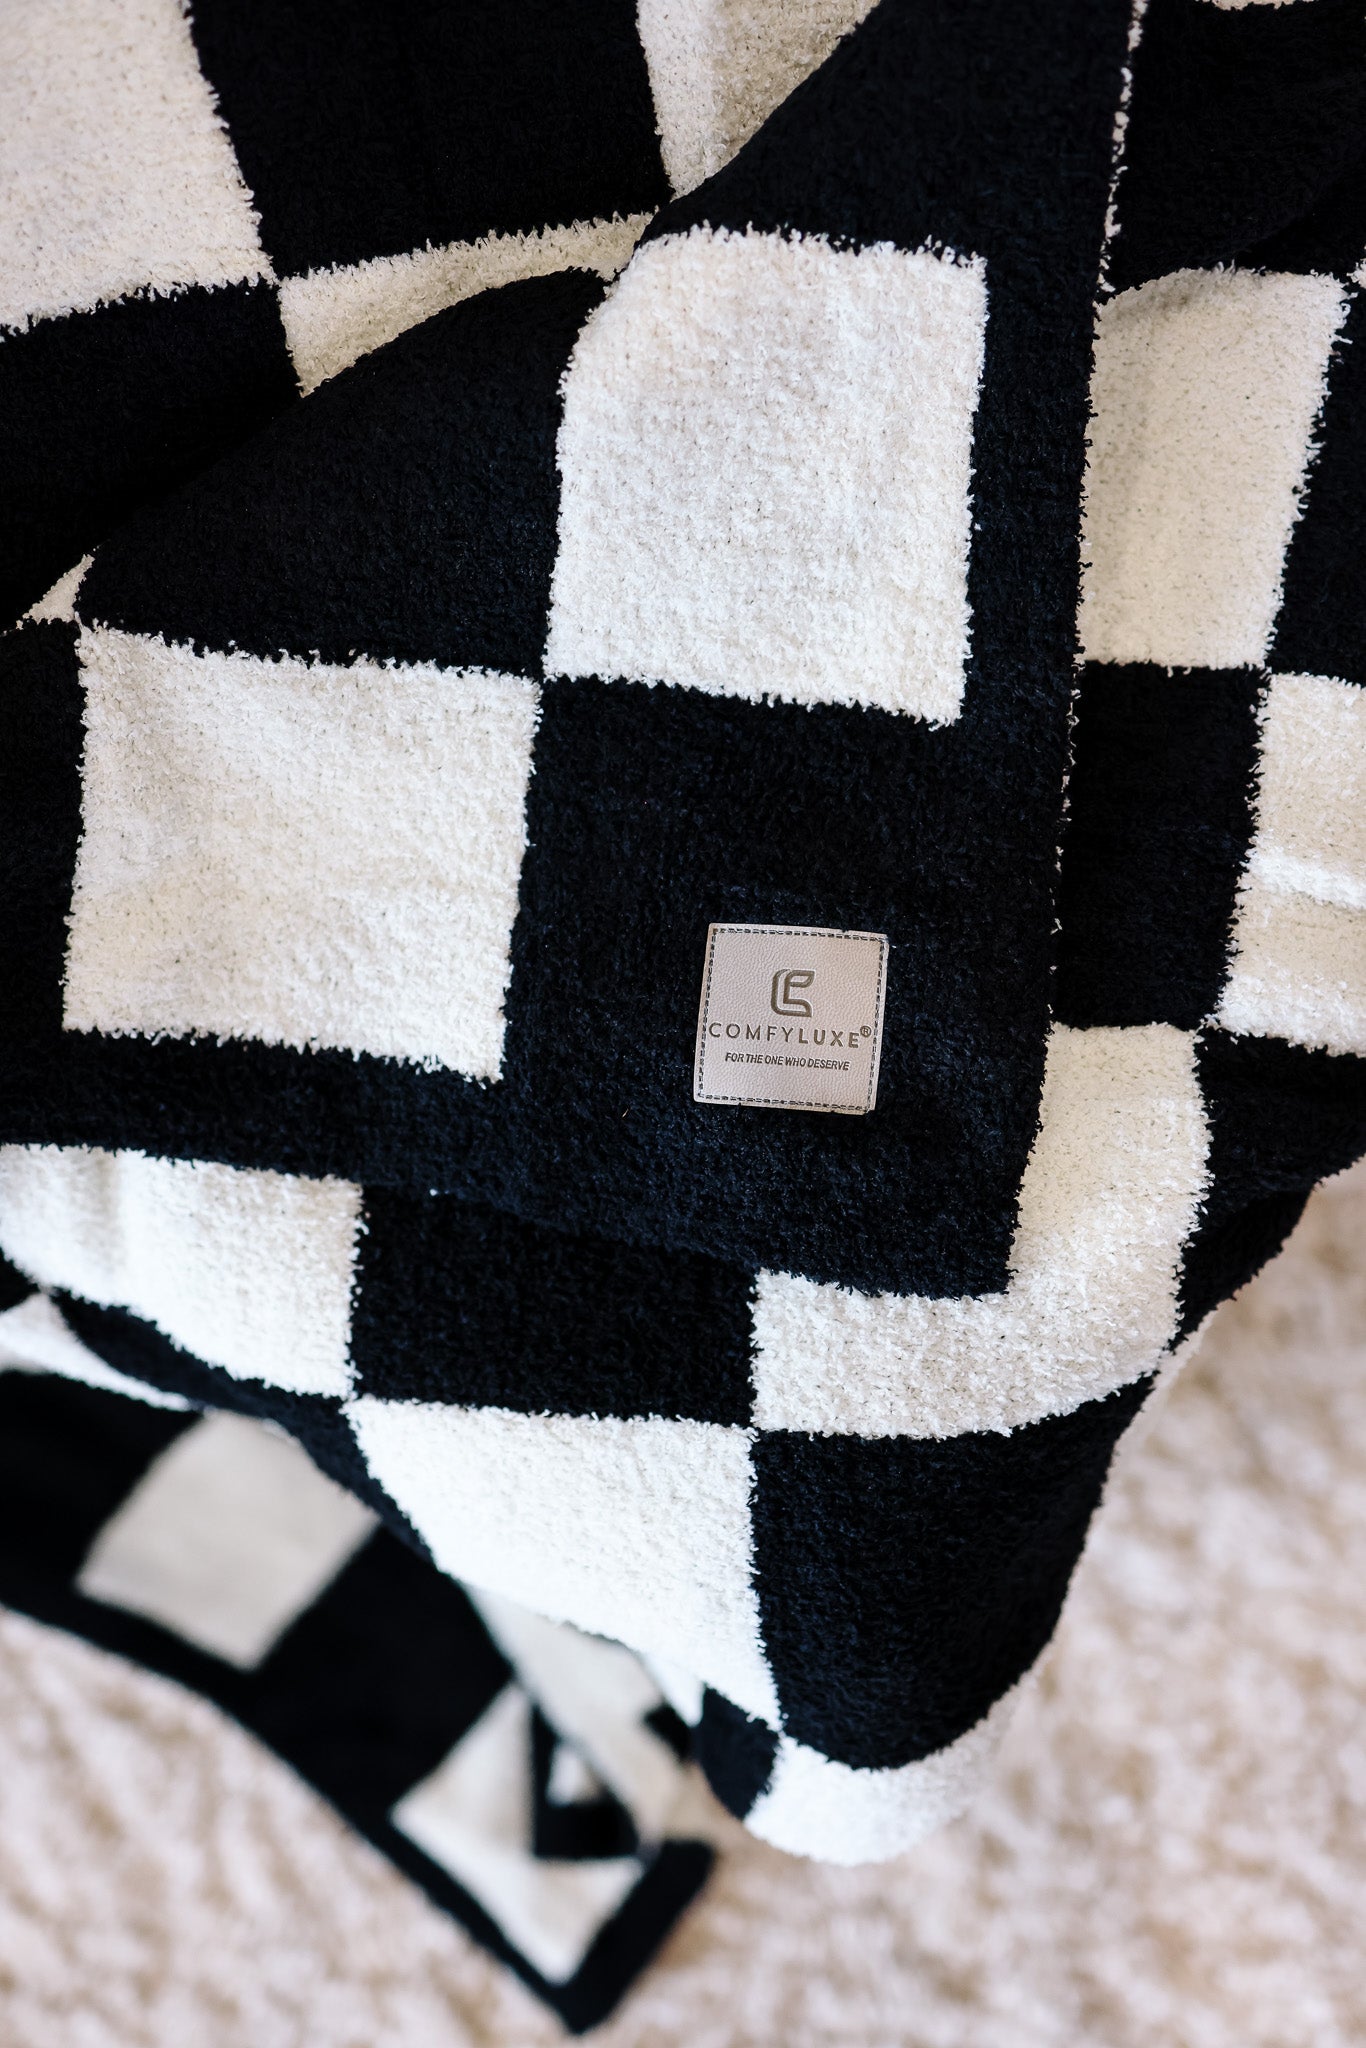 Checkerboard Comfy Luxe Blanket - Multiple Colors